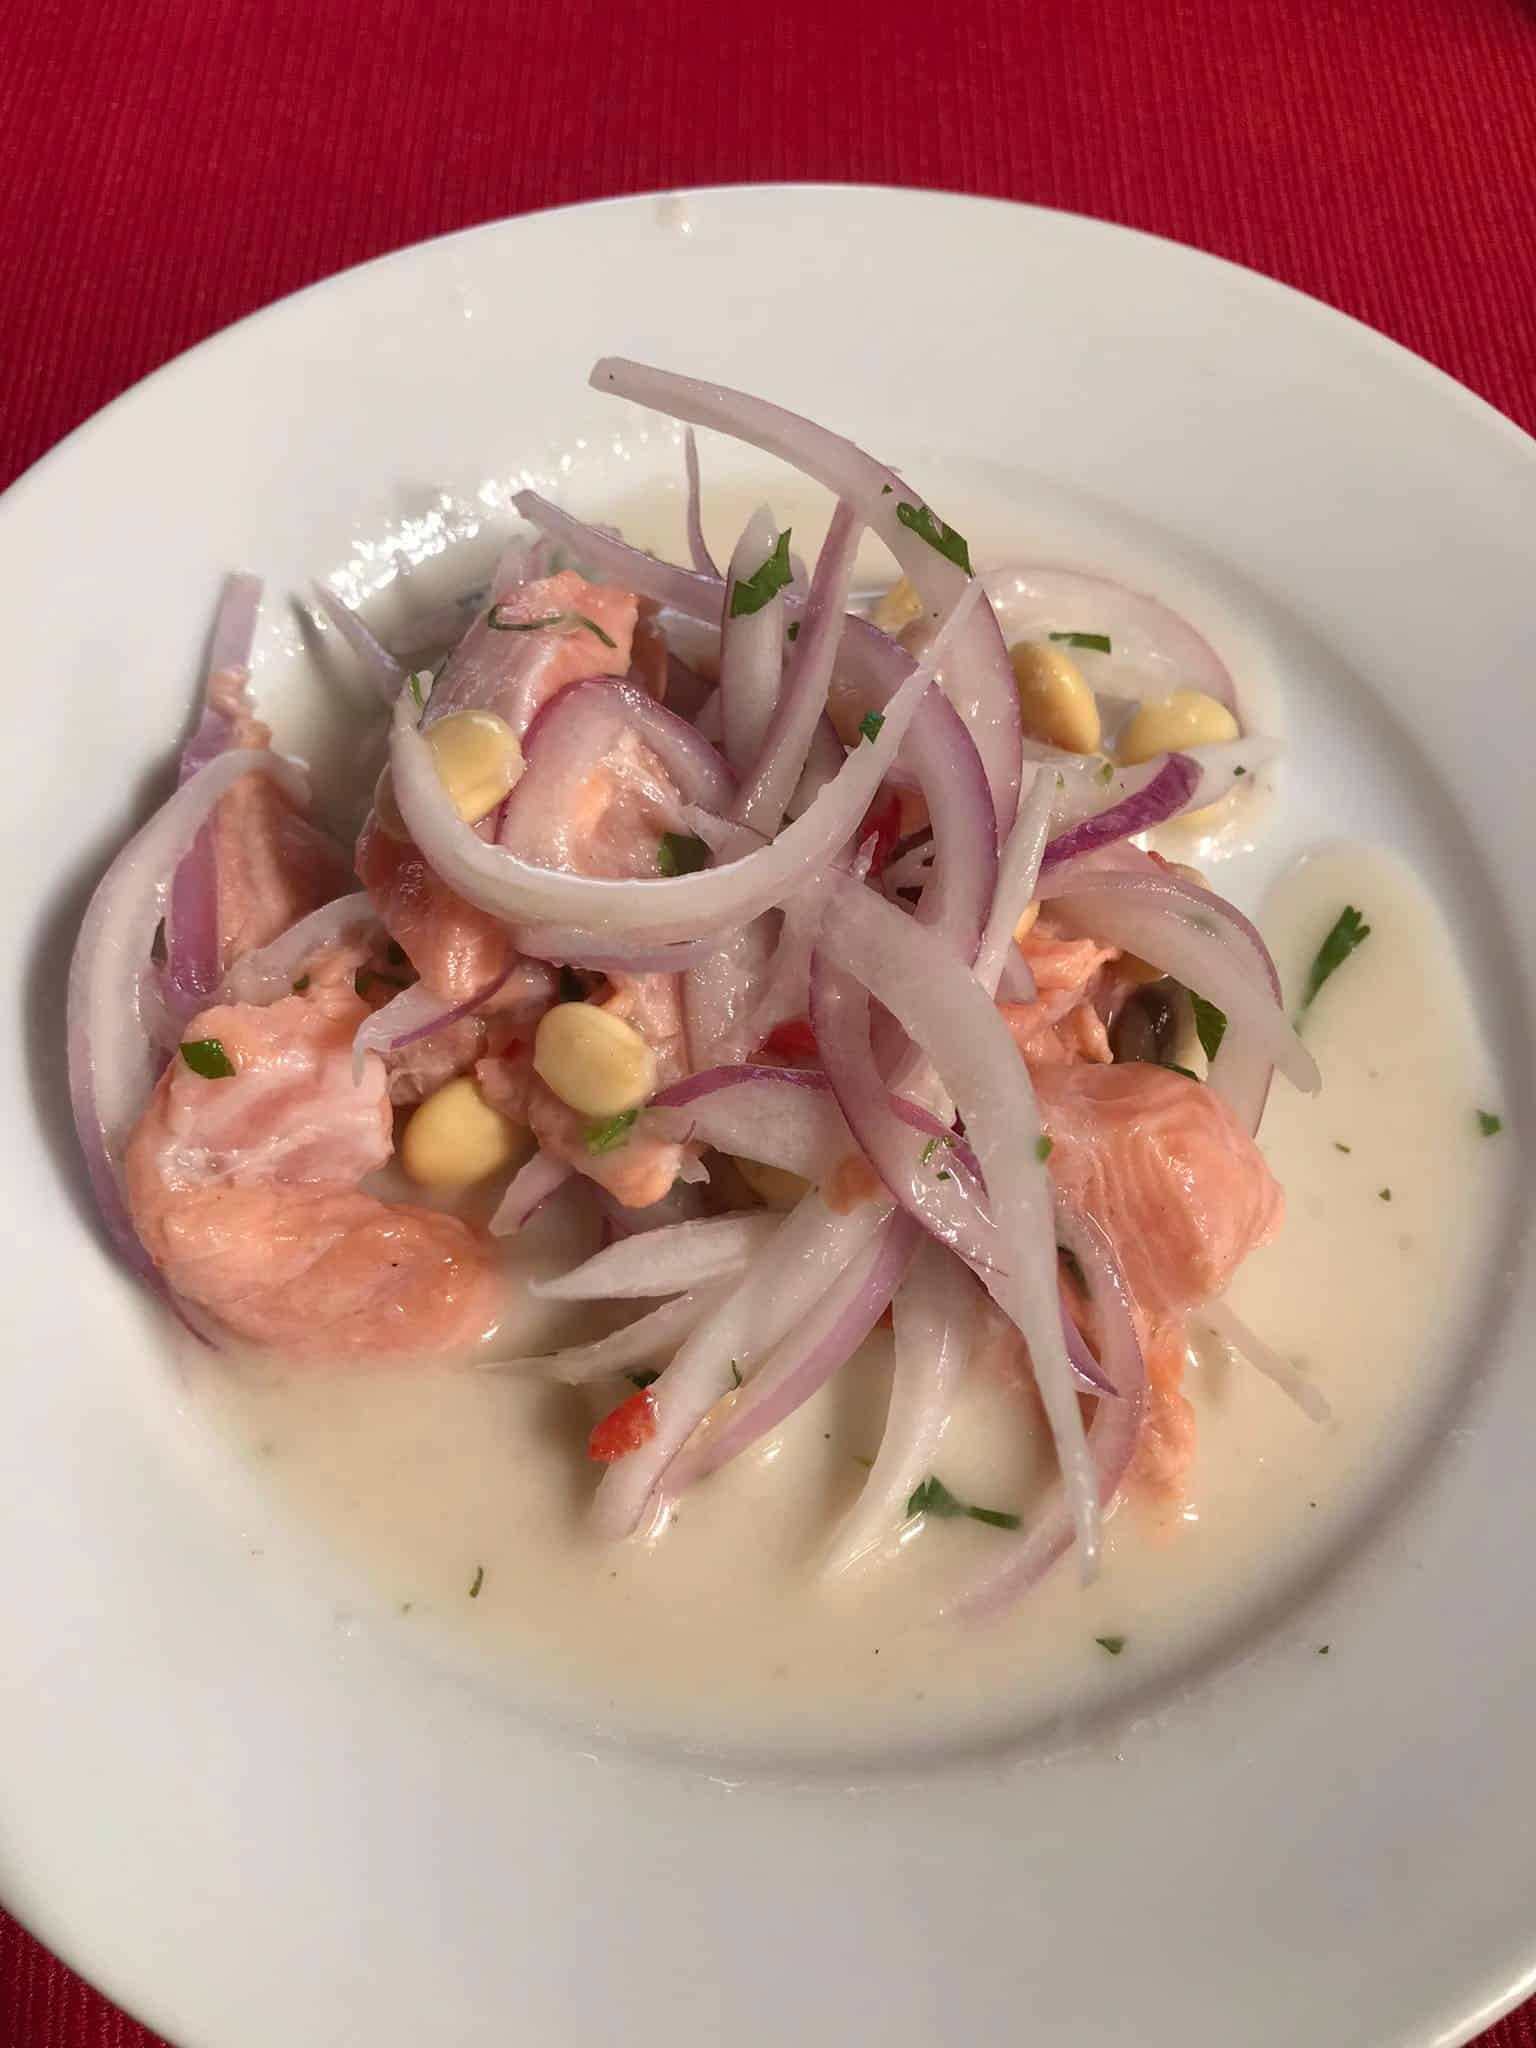 Enjoy a local lunch at Sacred Valley., Ceviche,